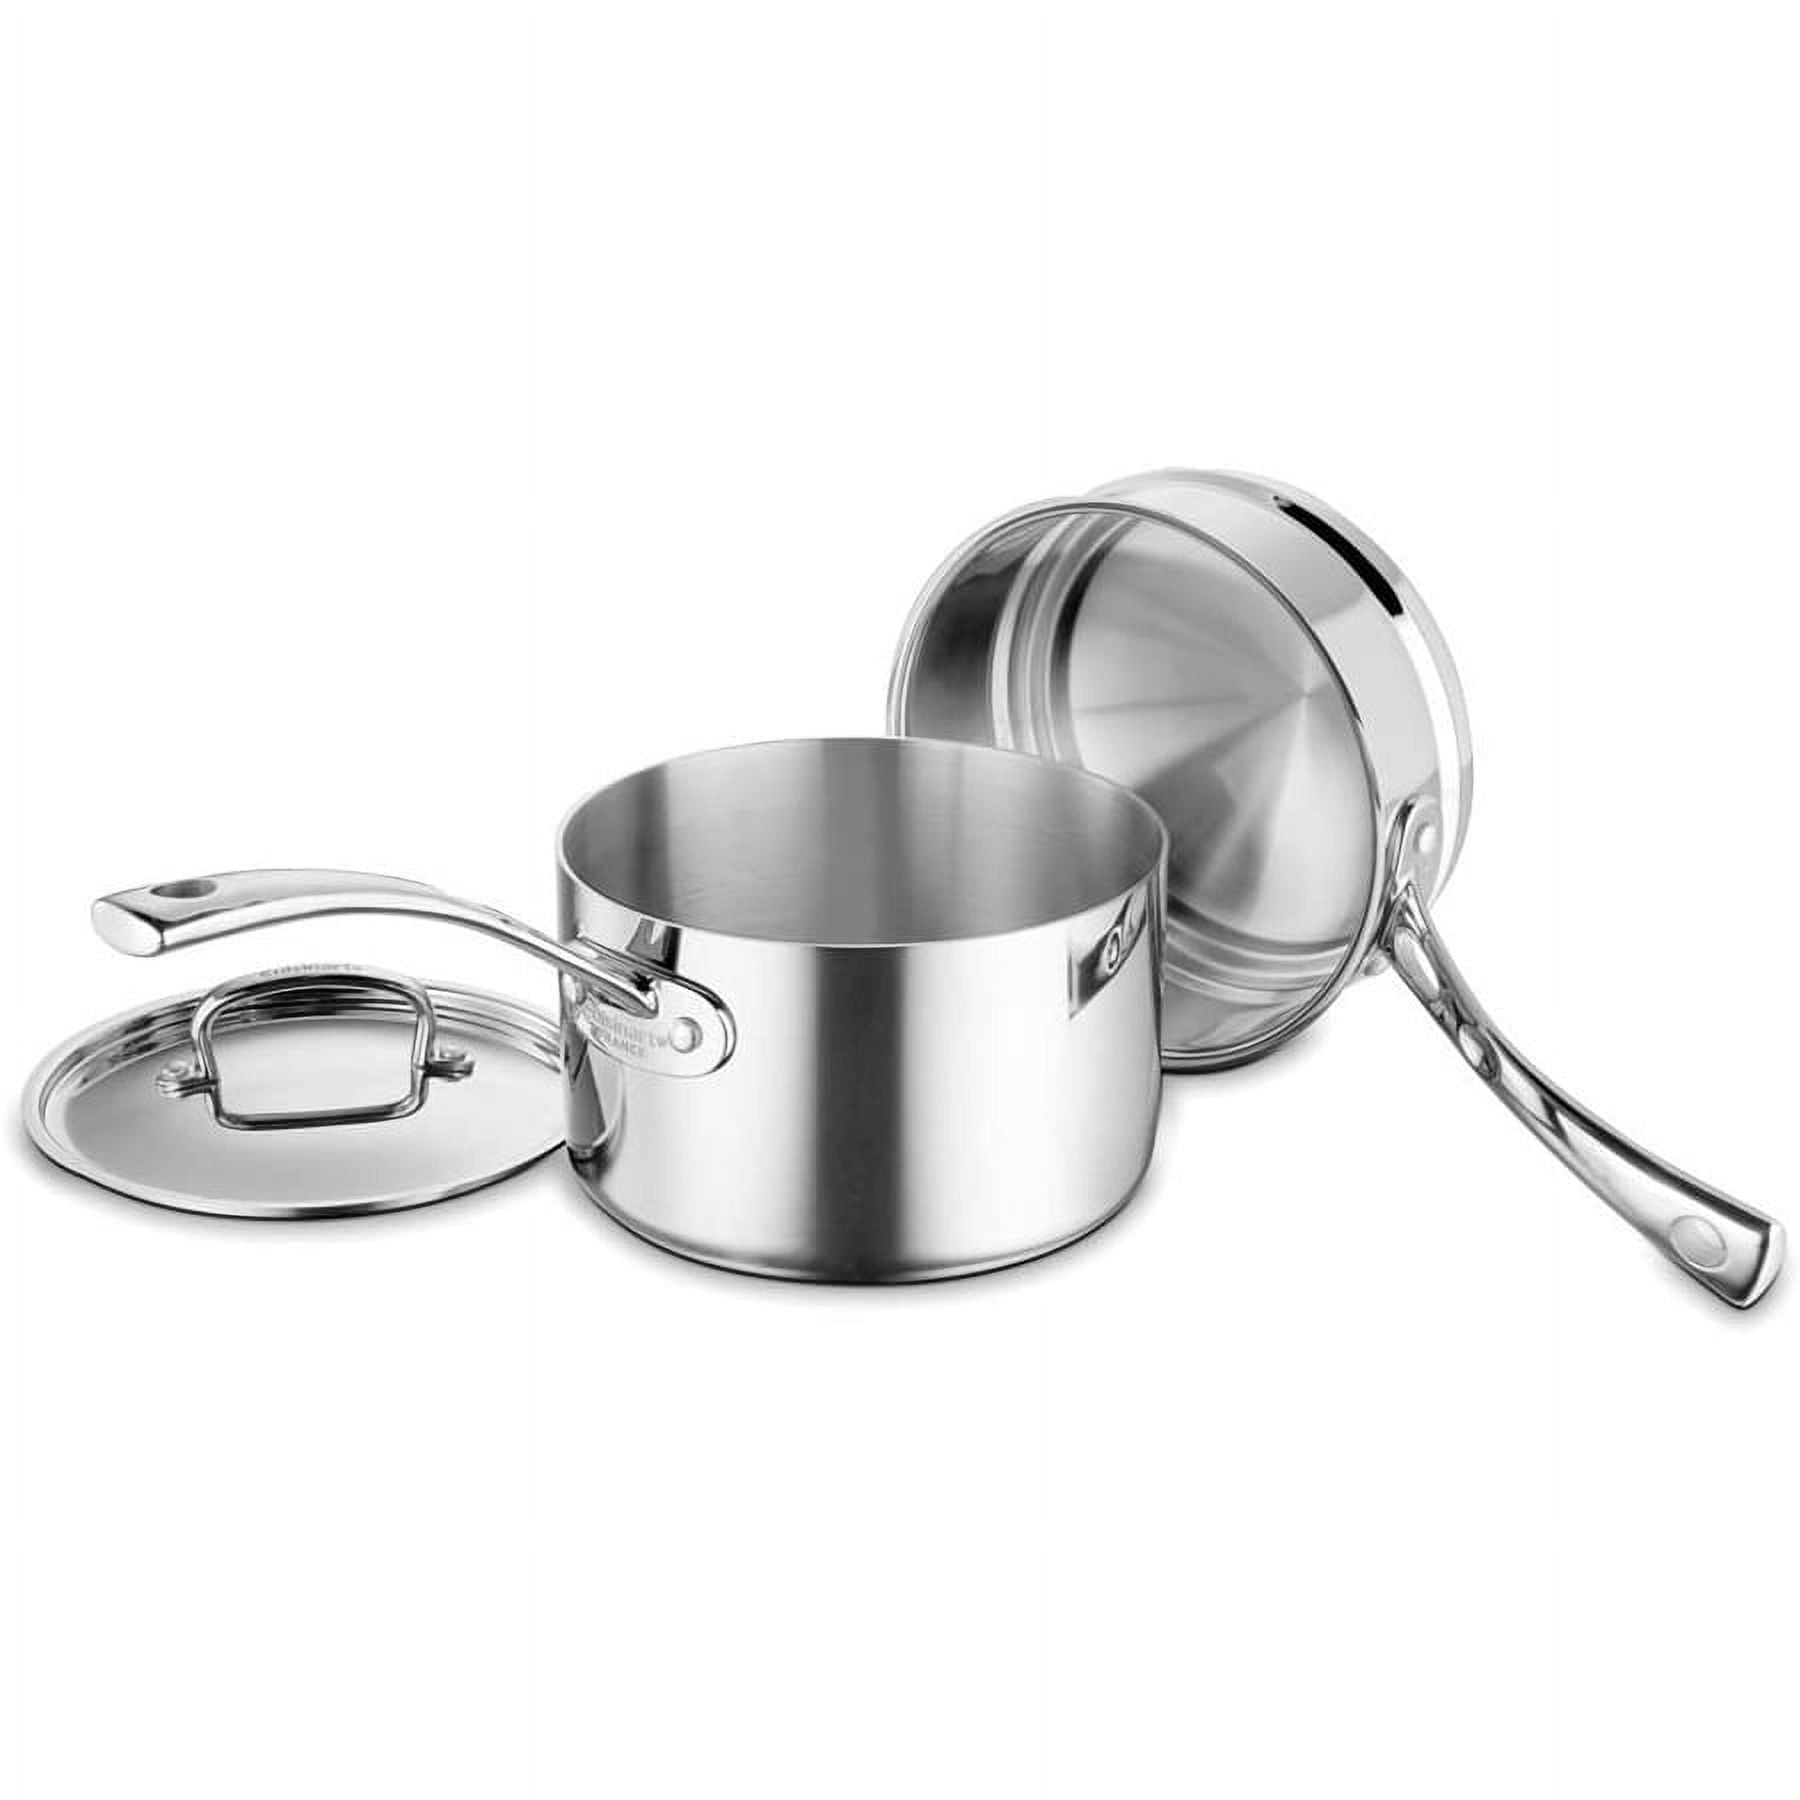 Farberware Stainless Steel with Aluminum Core Double Boiler - 2 Quart